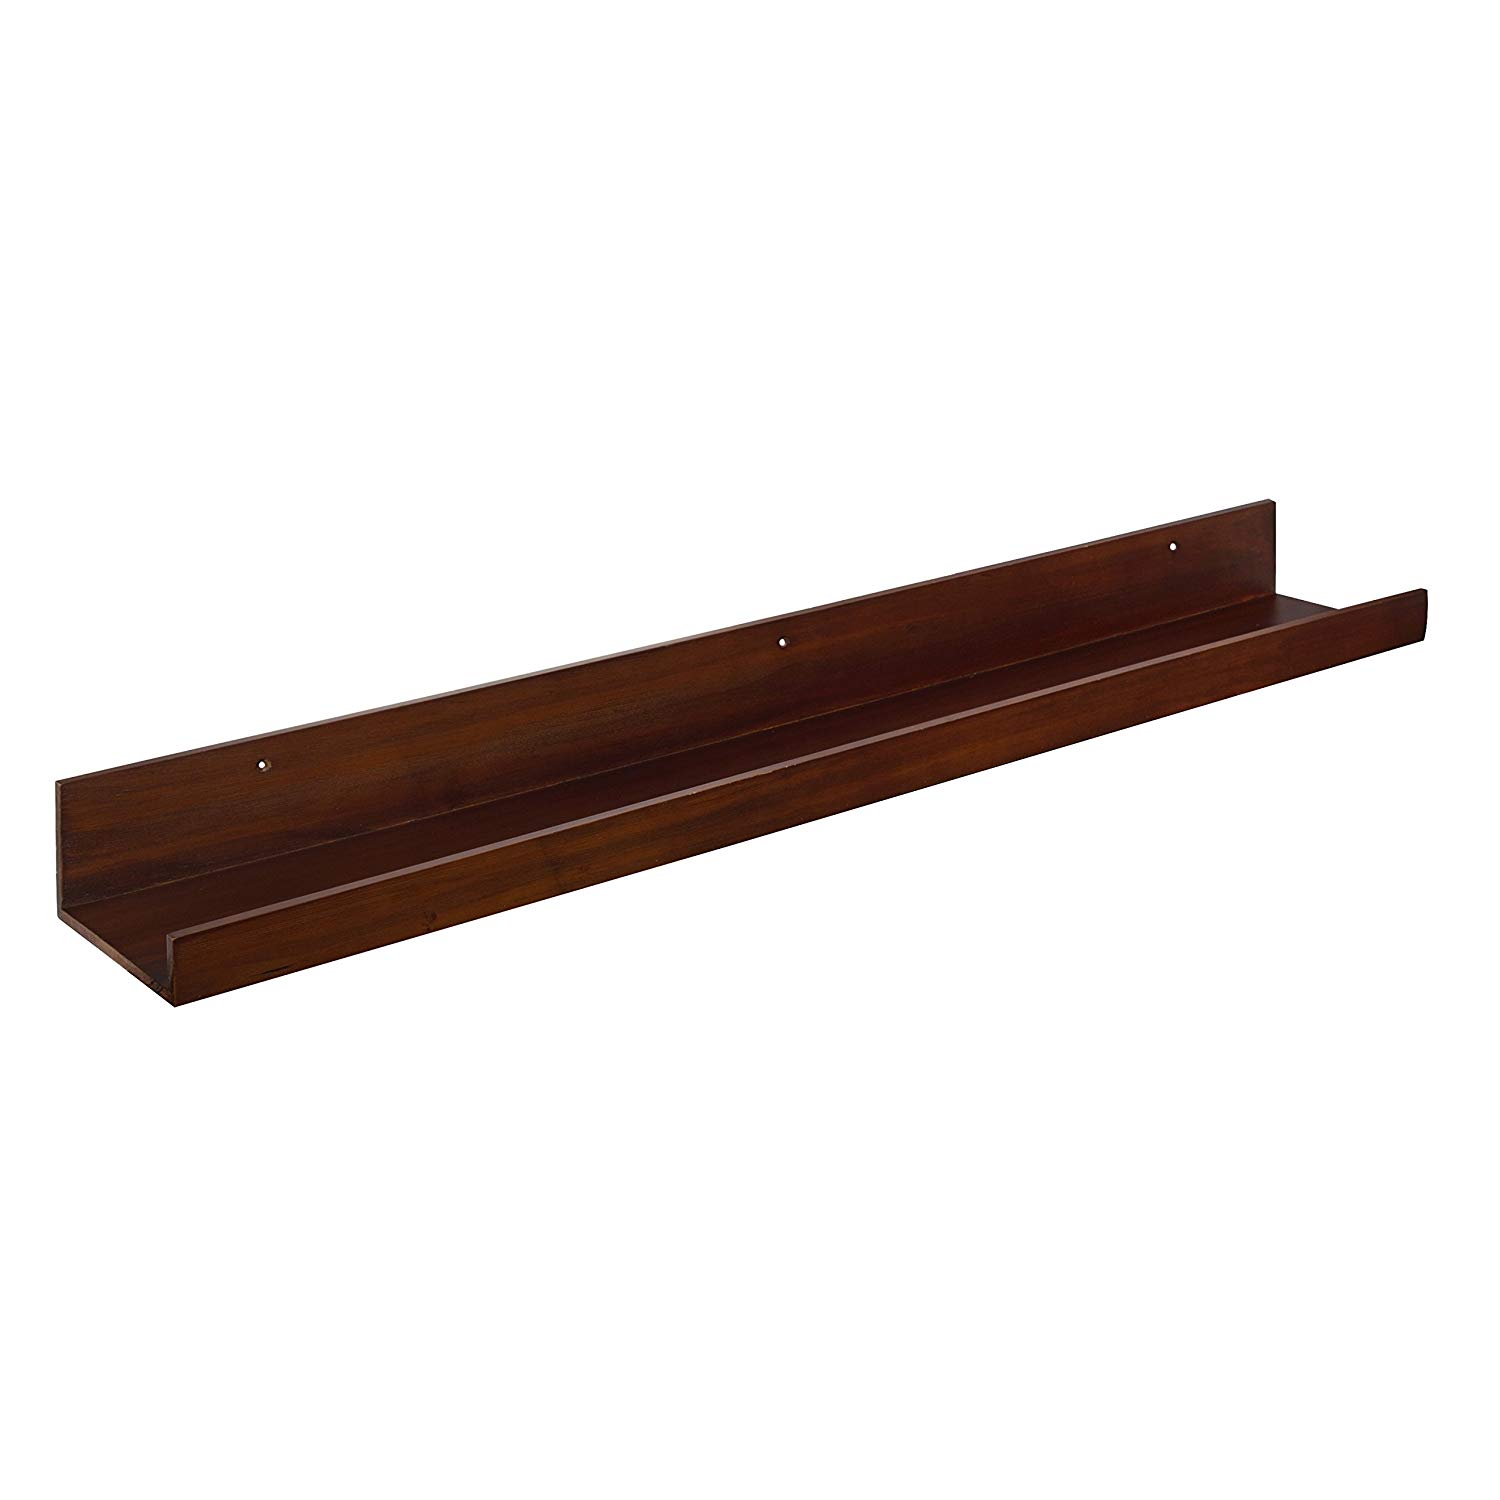 kate and laurel levie inch deep wood floating wall shelf ture frame ledge inches walnut brown home kitchen insert shelves ikea bathroom corner kmart furniture for small bedrooms